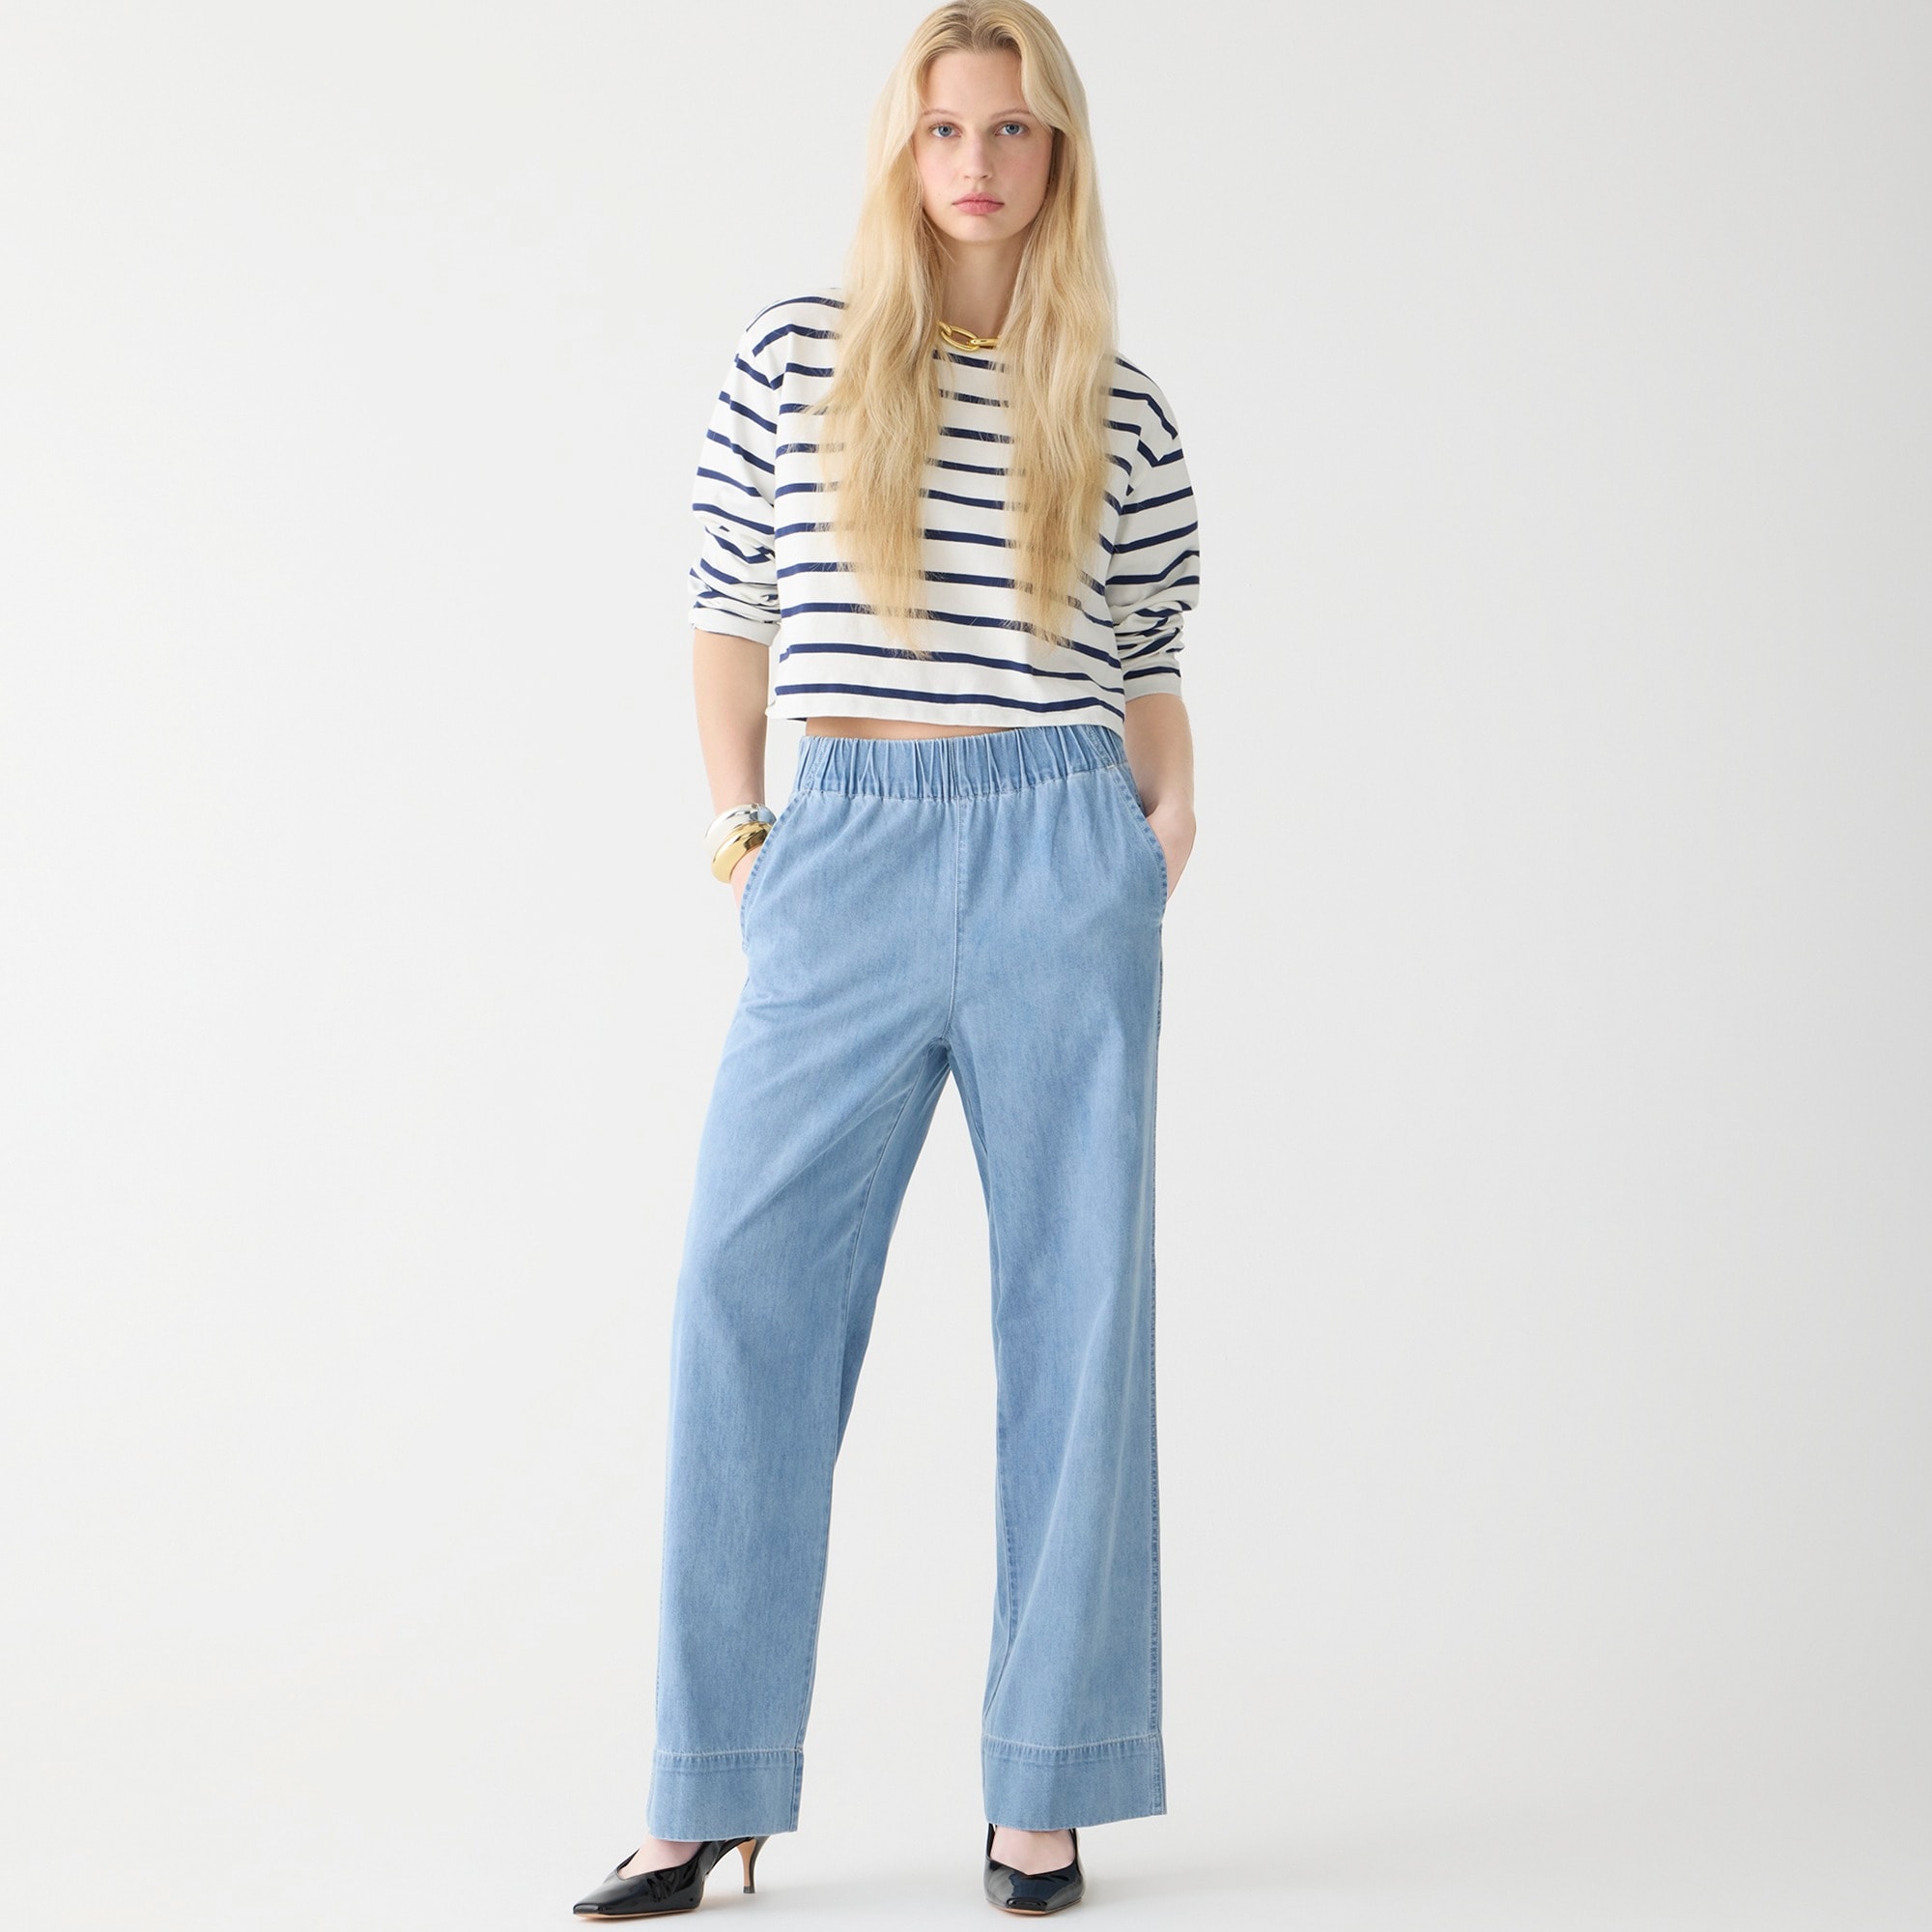  Petite Astrid pant in chambray